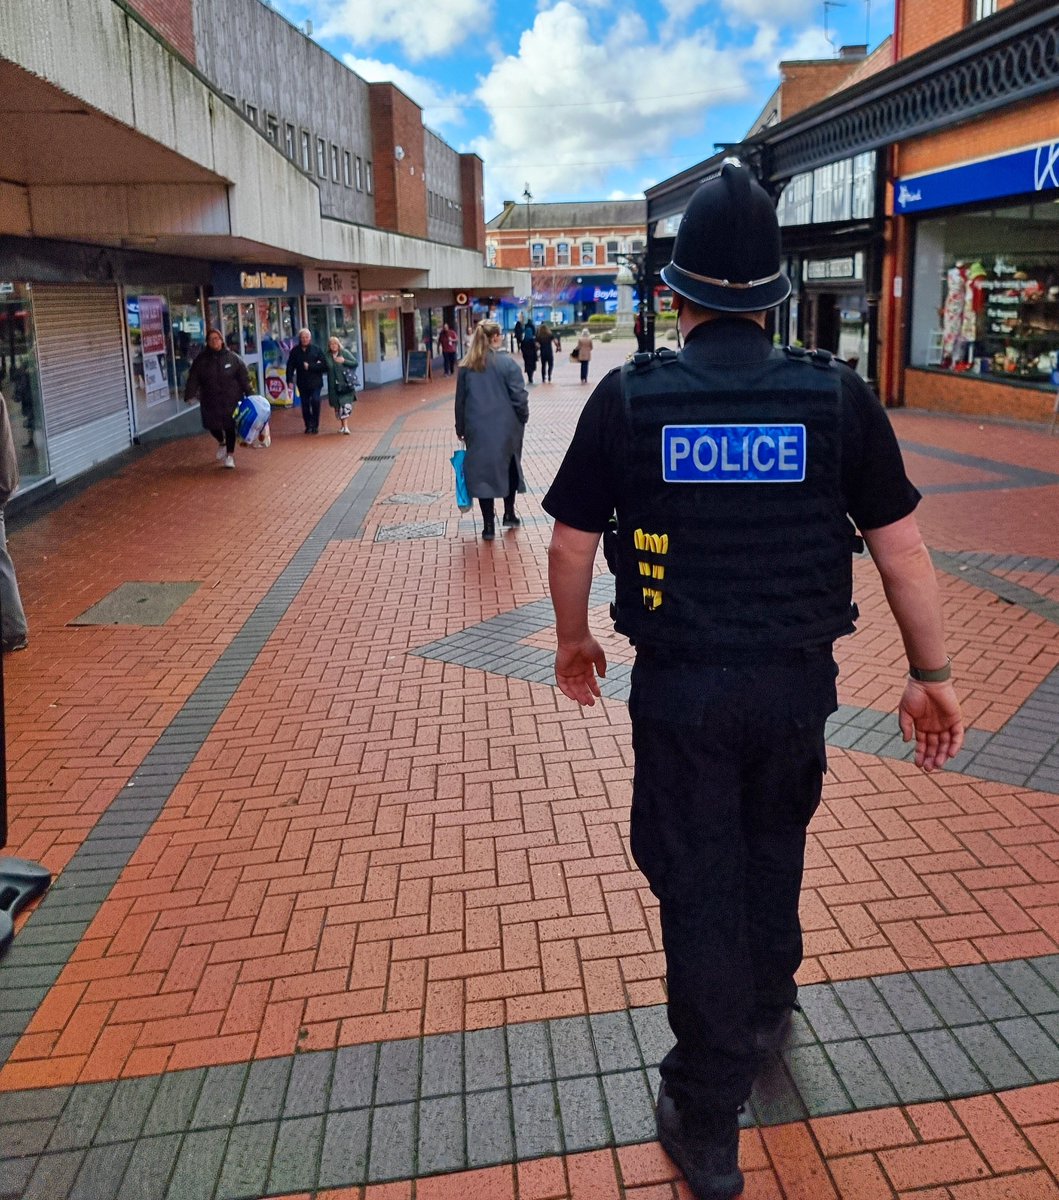 CANNOCK; Today we continued our patrols in Cannock Town Centre as part of Operation Saltmine. Nice to see so many locals enjoying the town centre and visiting local businesses. These patrols are ongoing so if you see us, please say hello! 👮‍♂️👋 #OpSaltmime #Cannock #Police